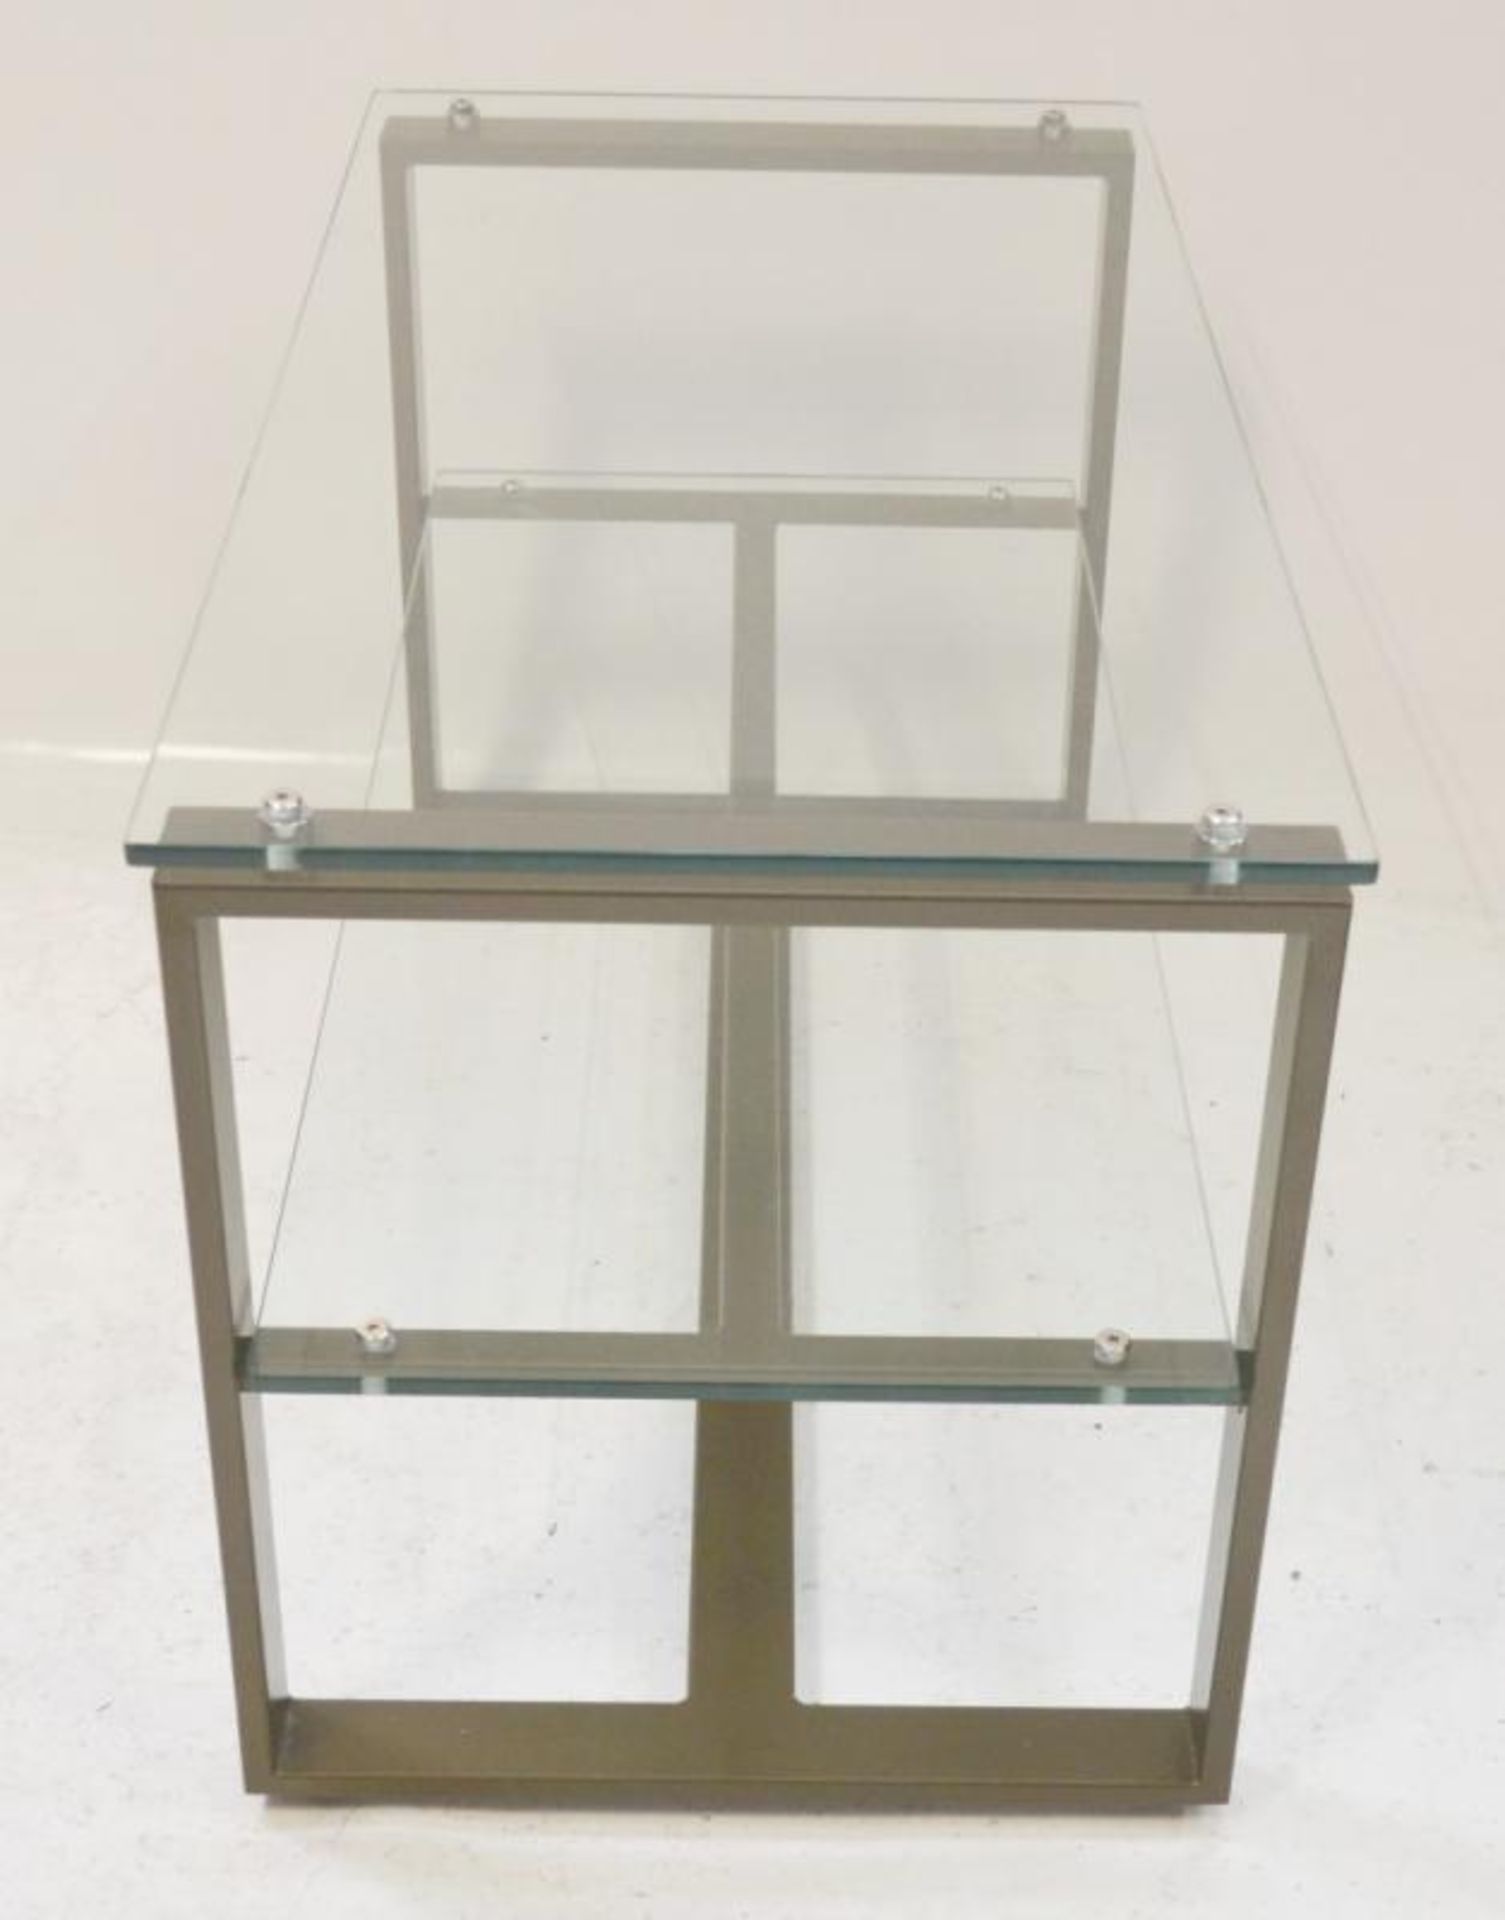 4 x 2-Shelf Glass Retail Display Units With Sturdy Metal Frames - Ex-Display, Recently Removed From - Image 2 of 4